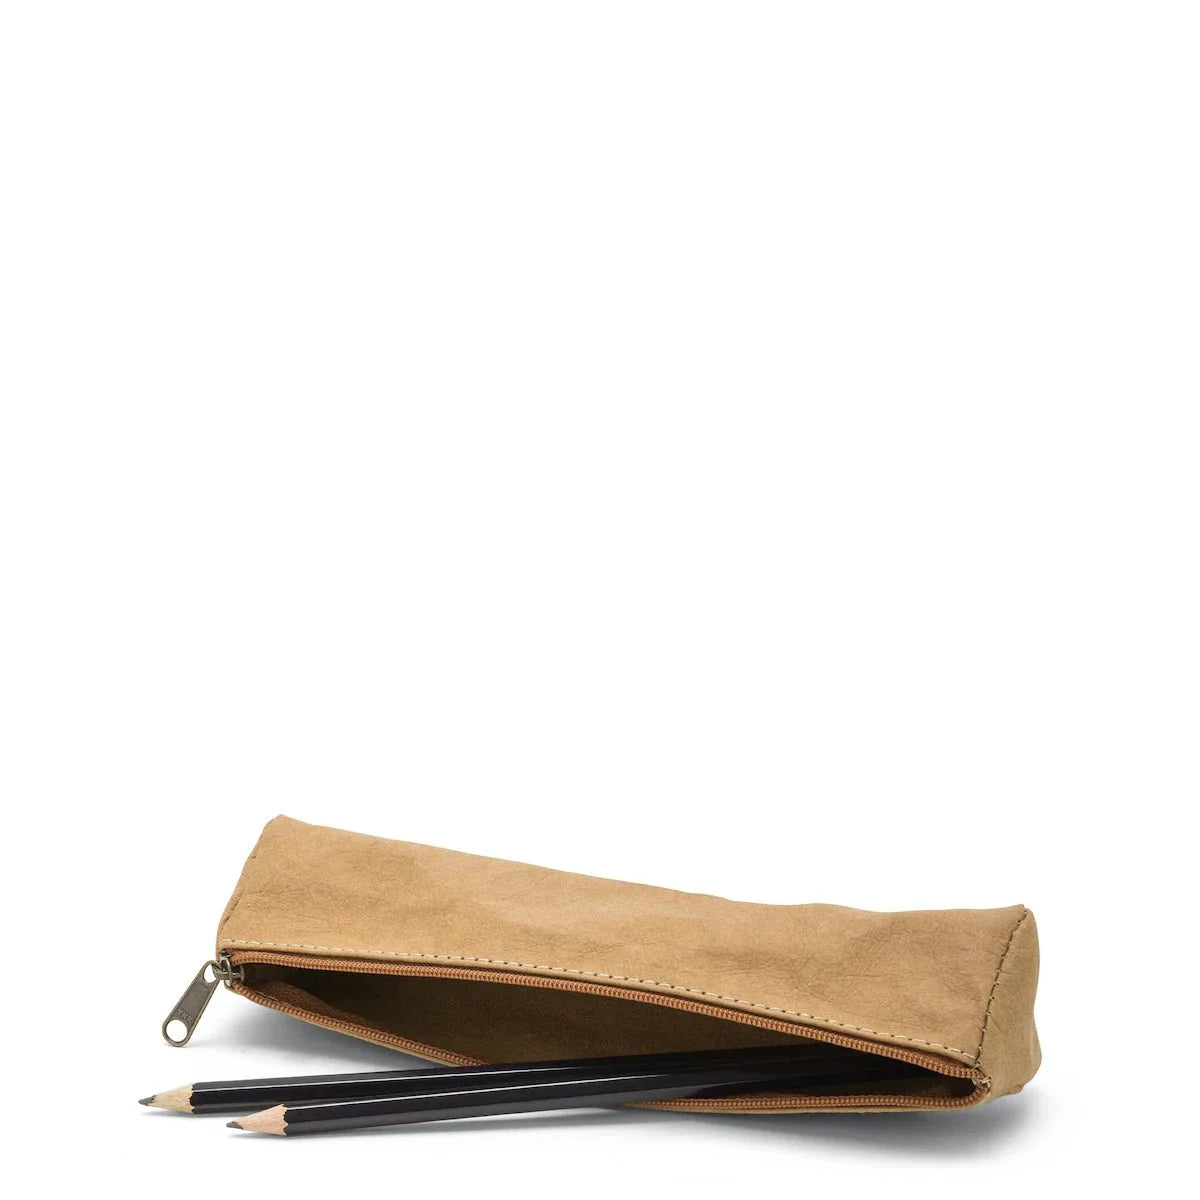 A washable paper pencil case is shown on its side with two pencils spilling out. The pencil case is tan in colour and has a metal zip closure.